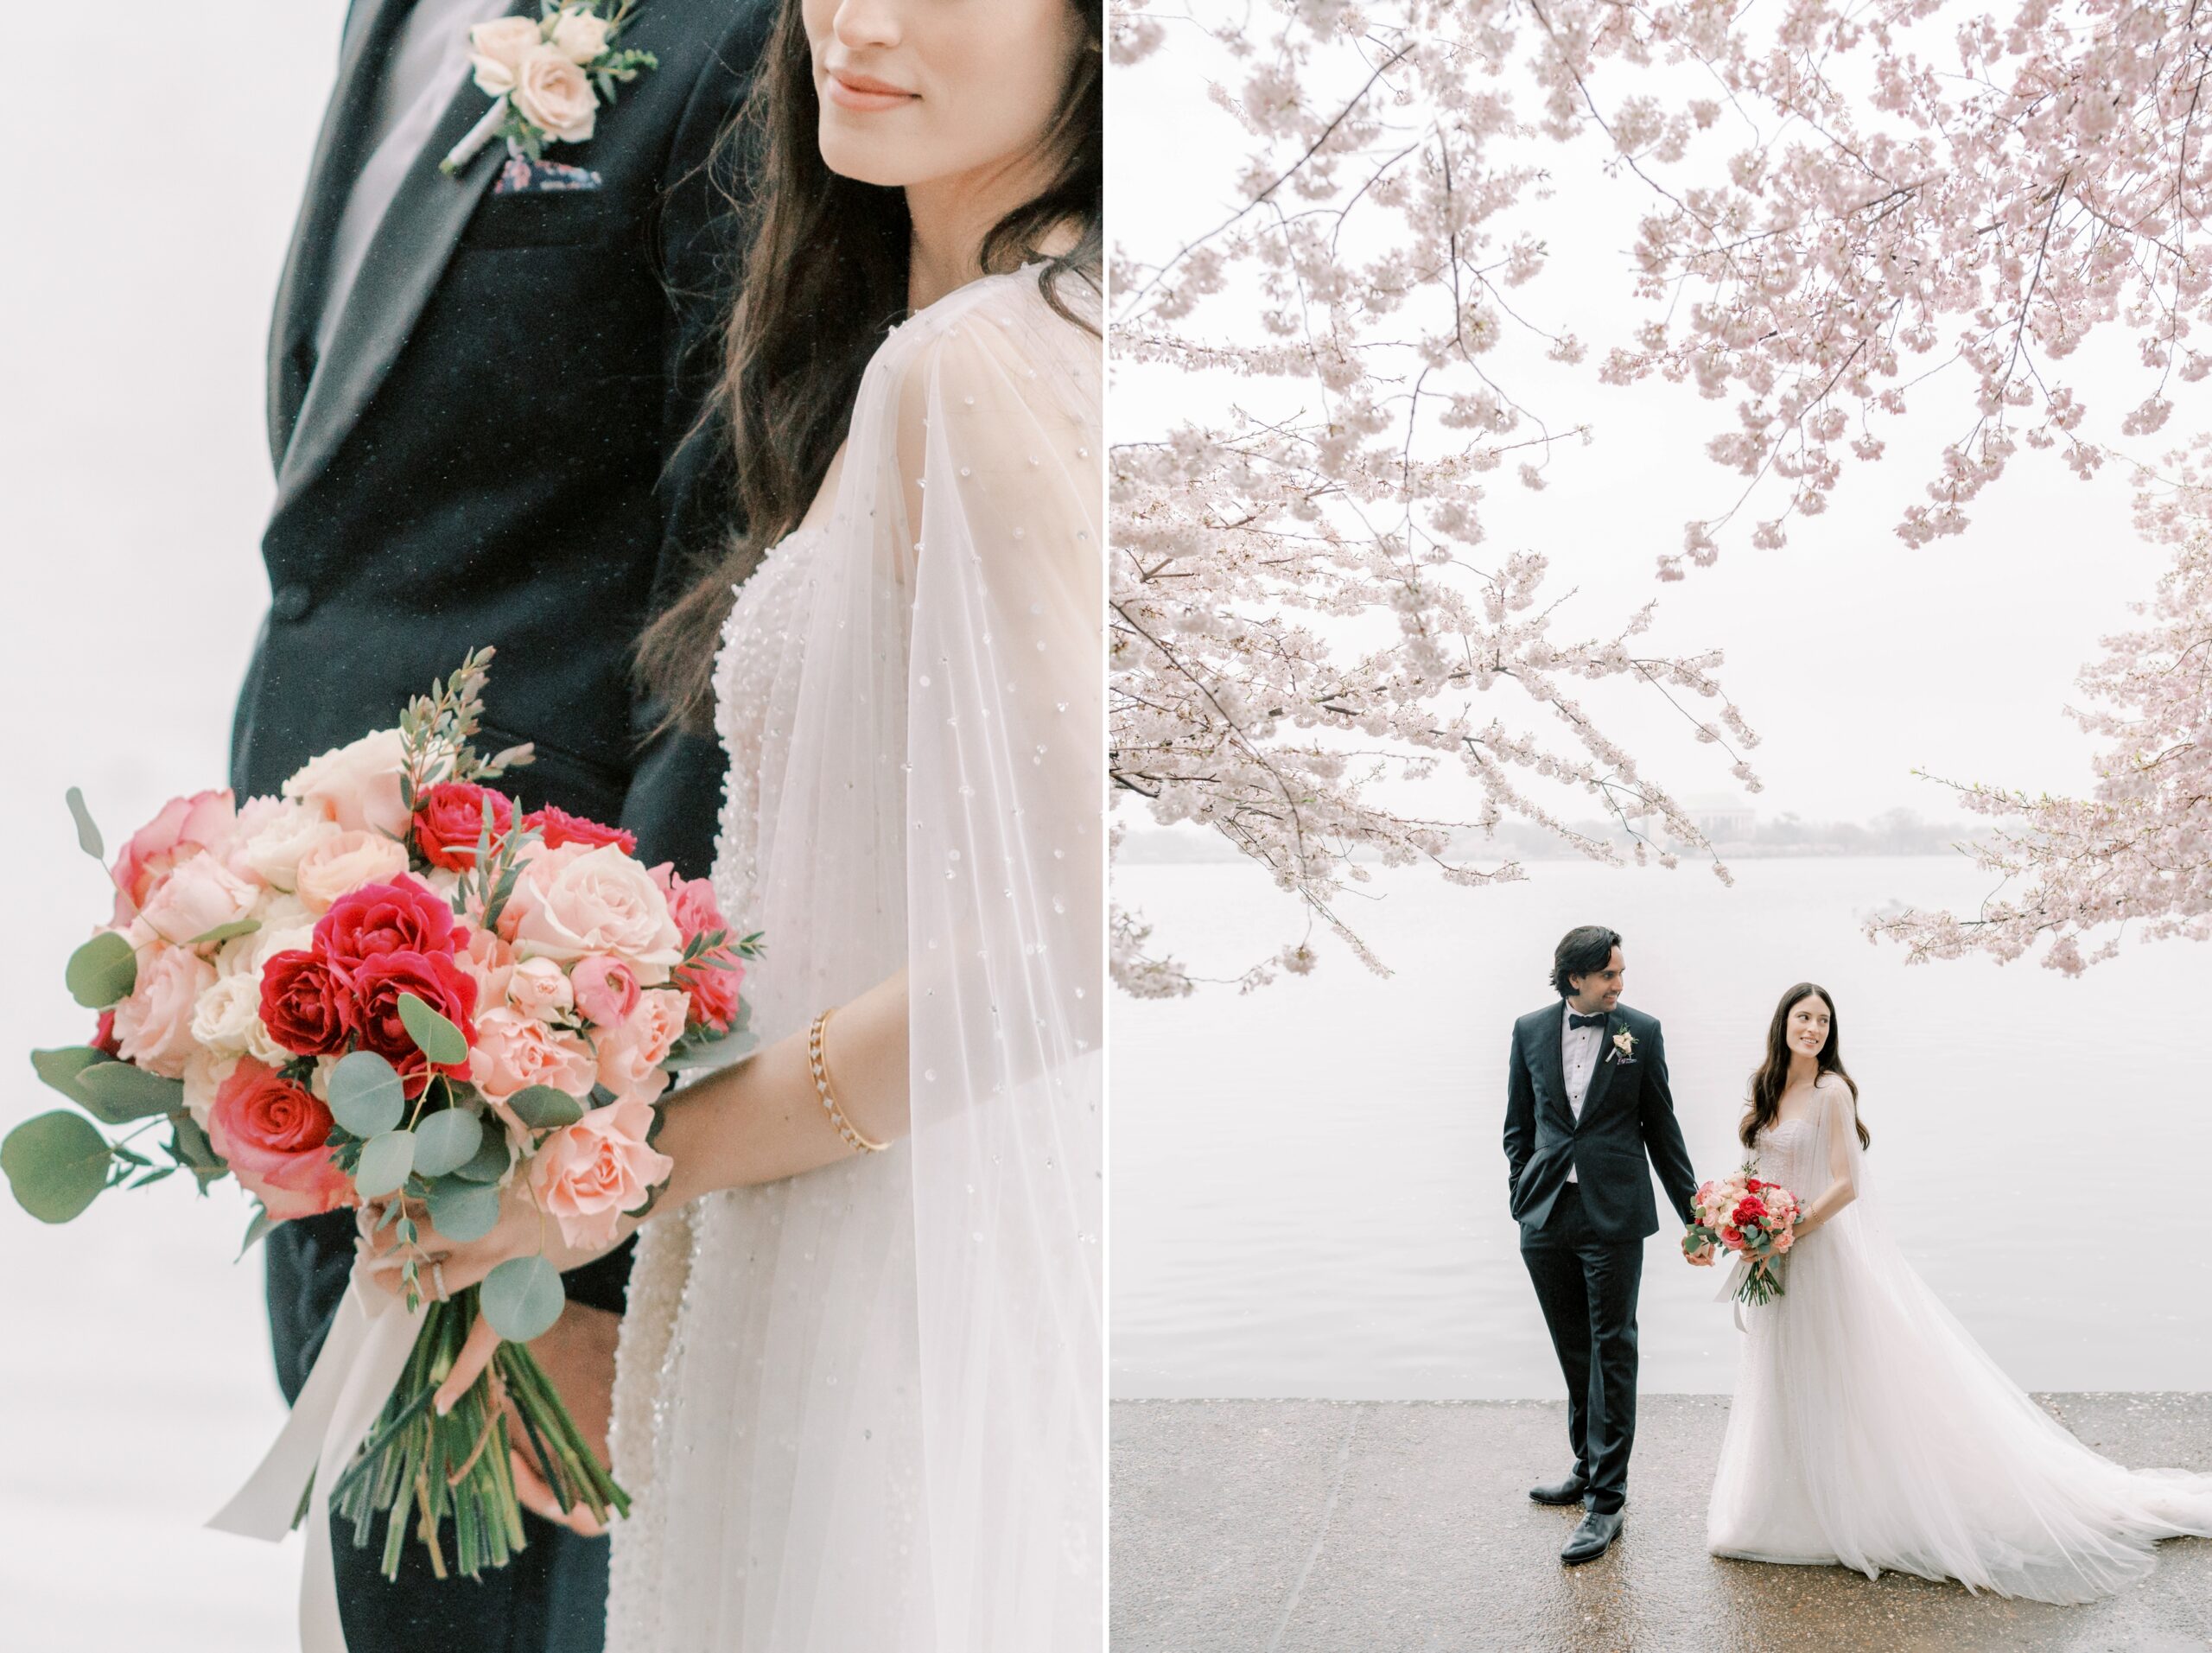 A stunning DC War Memorial wedding in Washington, DC followed by Cherry Blossom photos during peak bloom at the Tidal Basin!